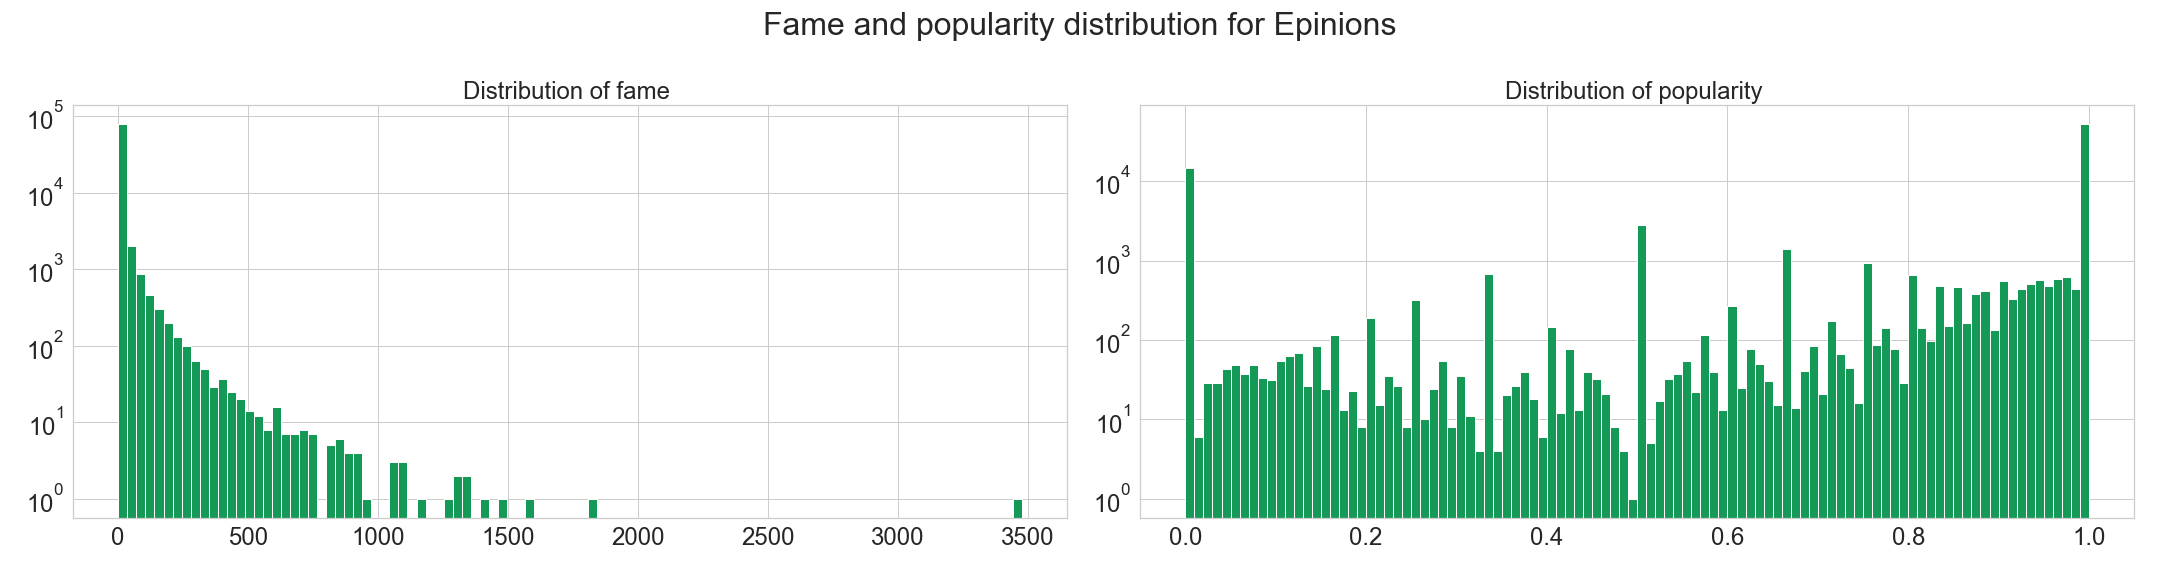 Fame and population distribution for Epinions